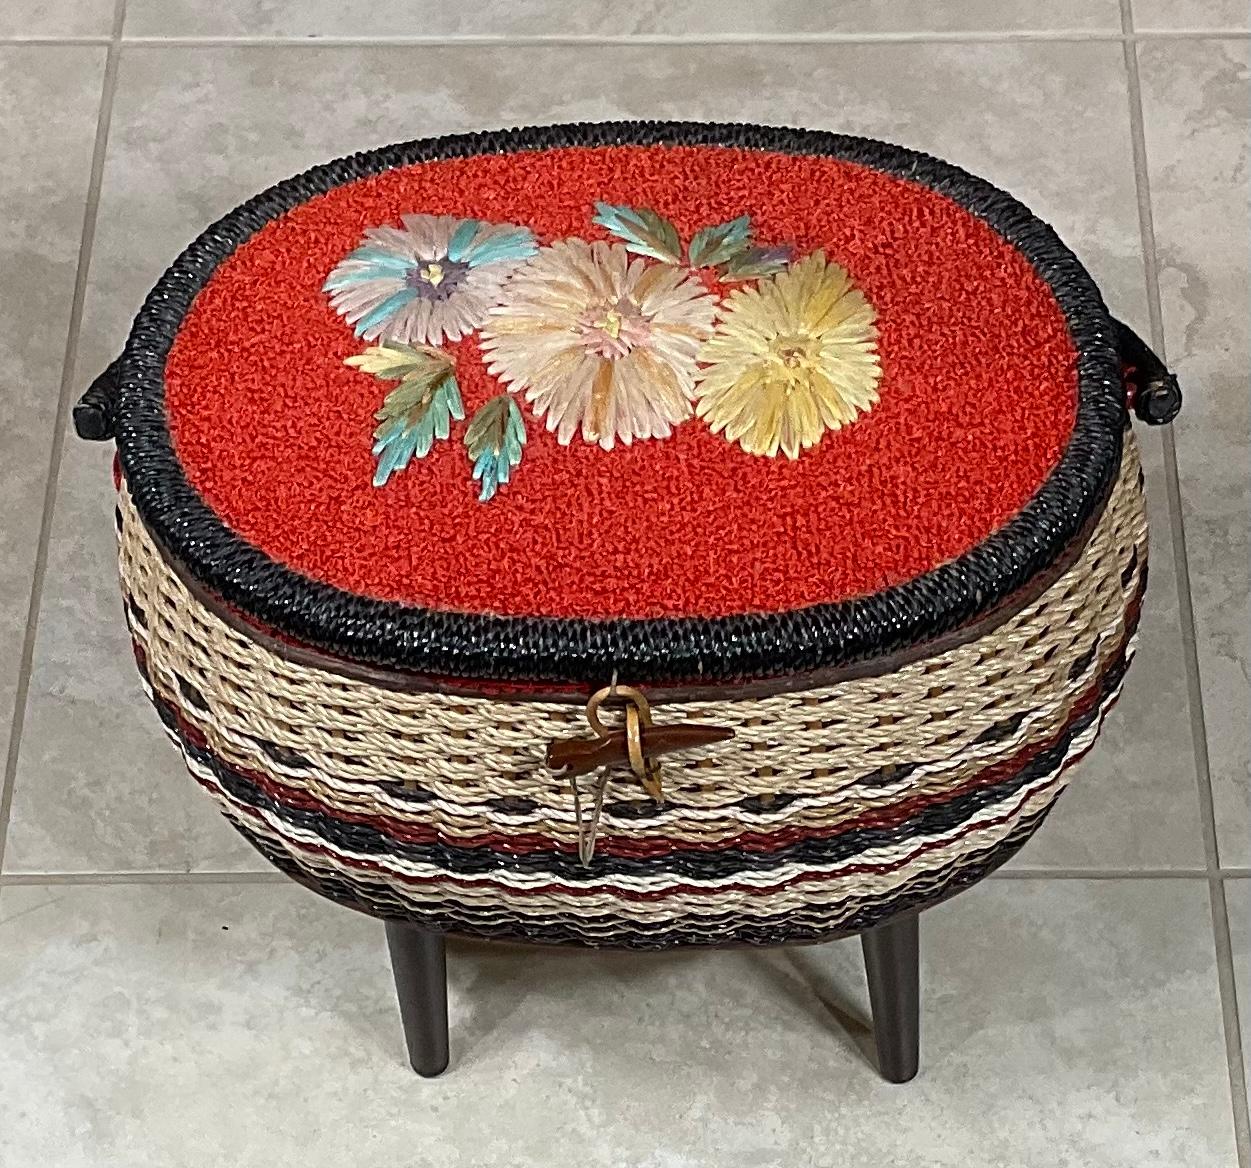 Lovely sewing kit made of hand painted rattan, the top is decorated artistically with floral raffia work. Inside include plastic try and nice upholstered storage compartment. 
Exceptional decoration for any room.
 